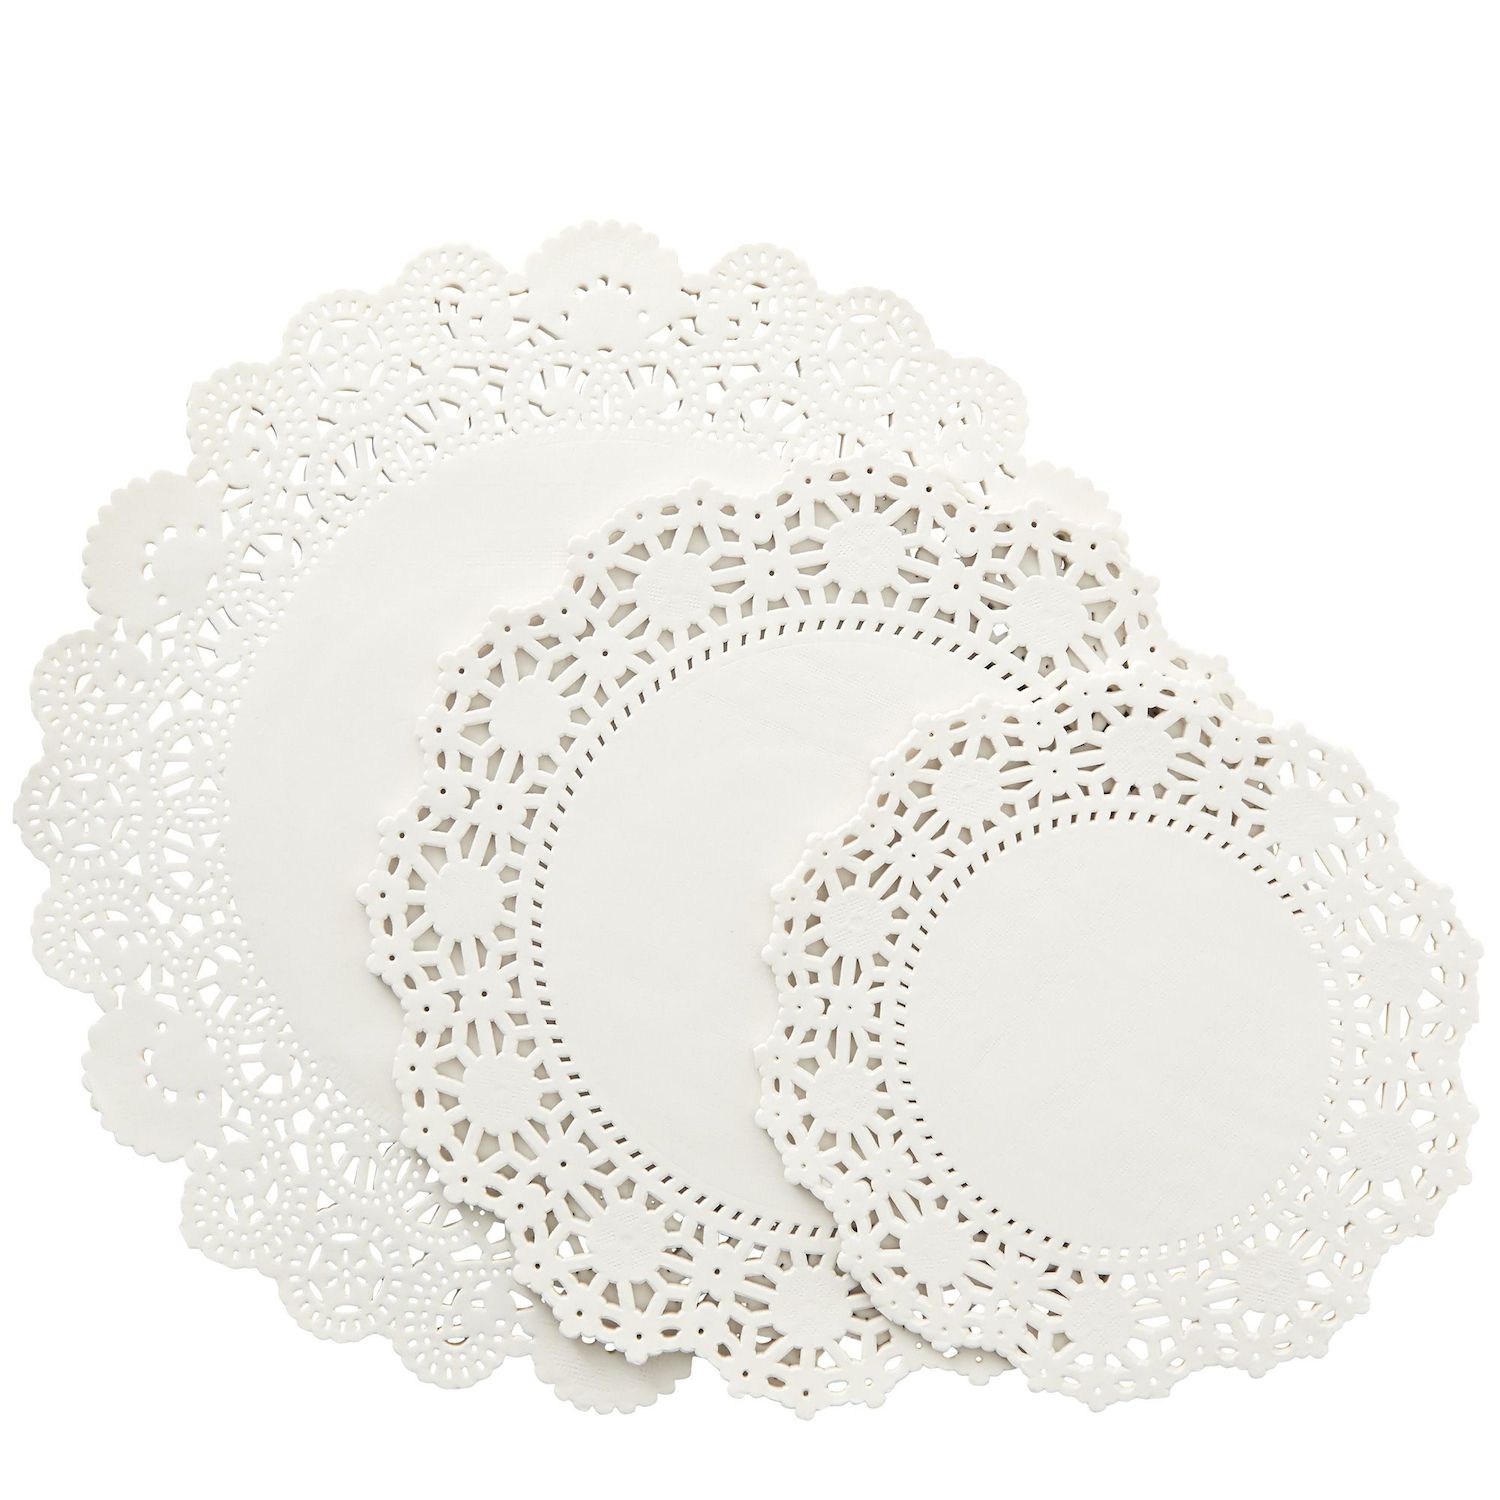 Pastry Tek 4 x 4 inch Lace Doilies, 100 Decorative Tableware Placemats - Disposable, Round, Pink Paper Table Doilies, for Birthdays, or Weddings, Tabl